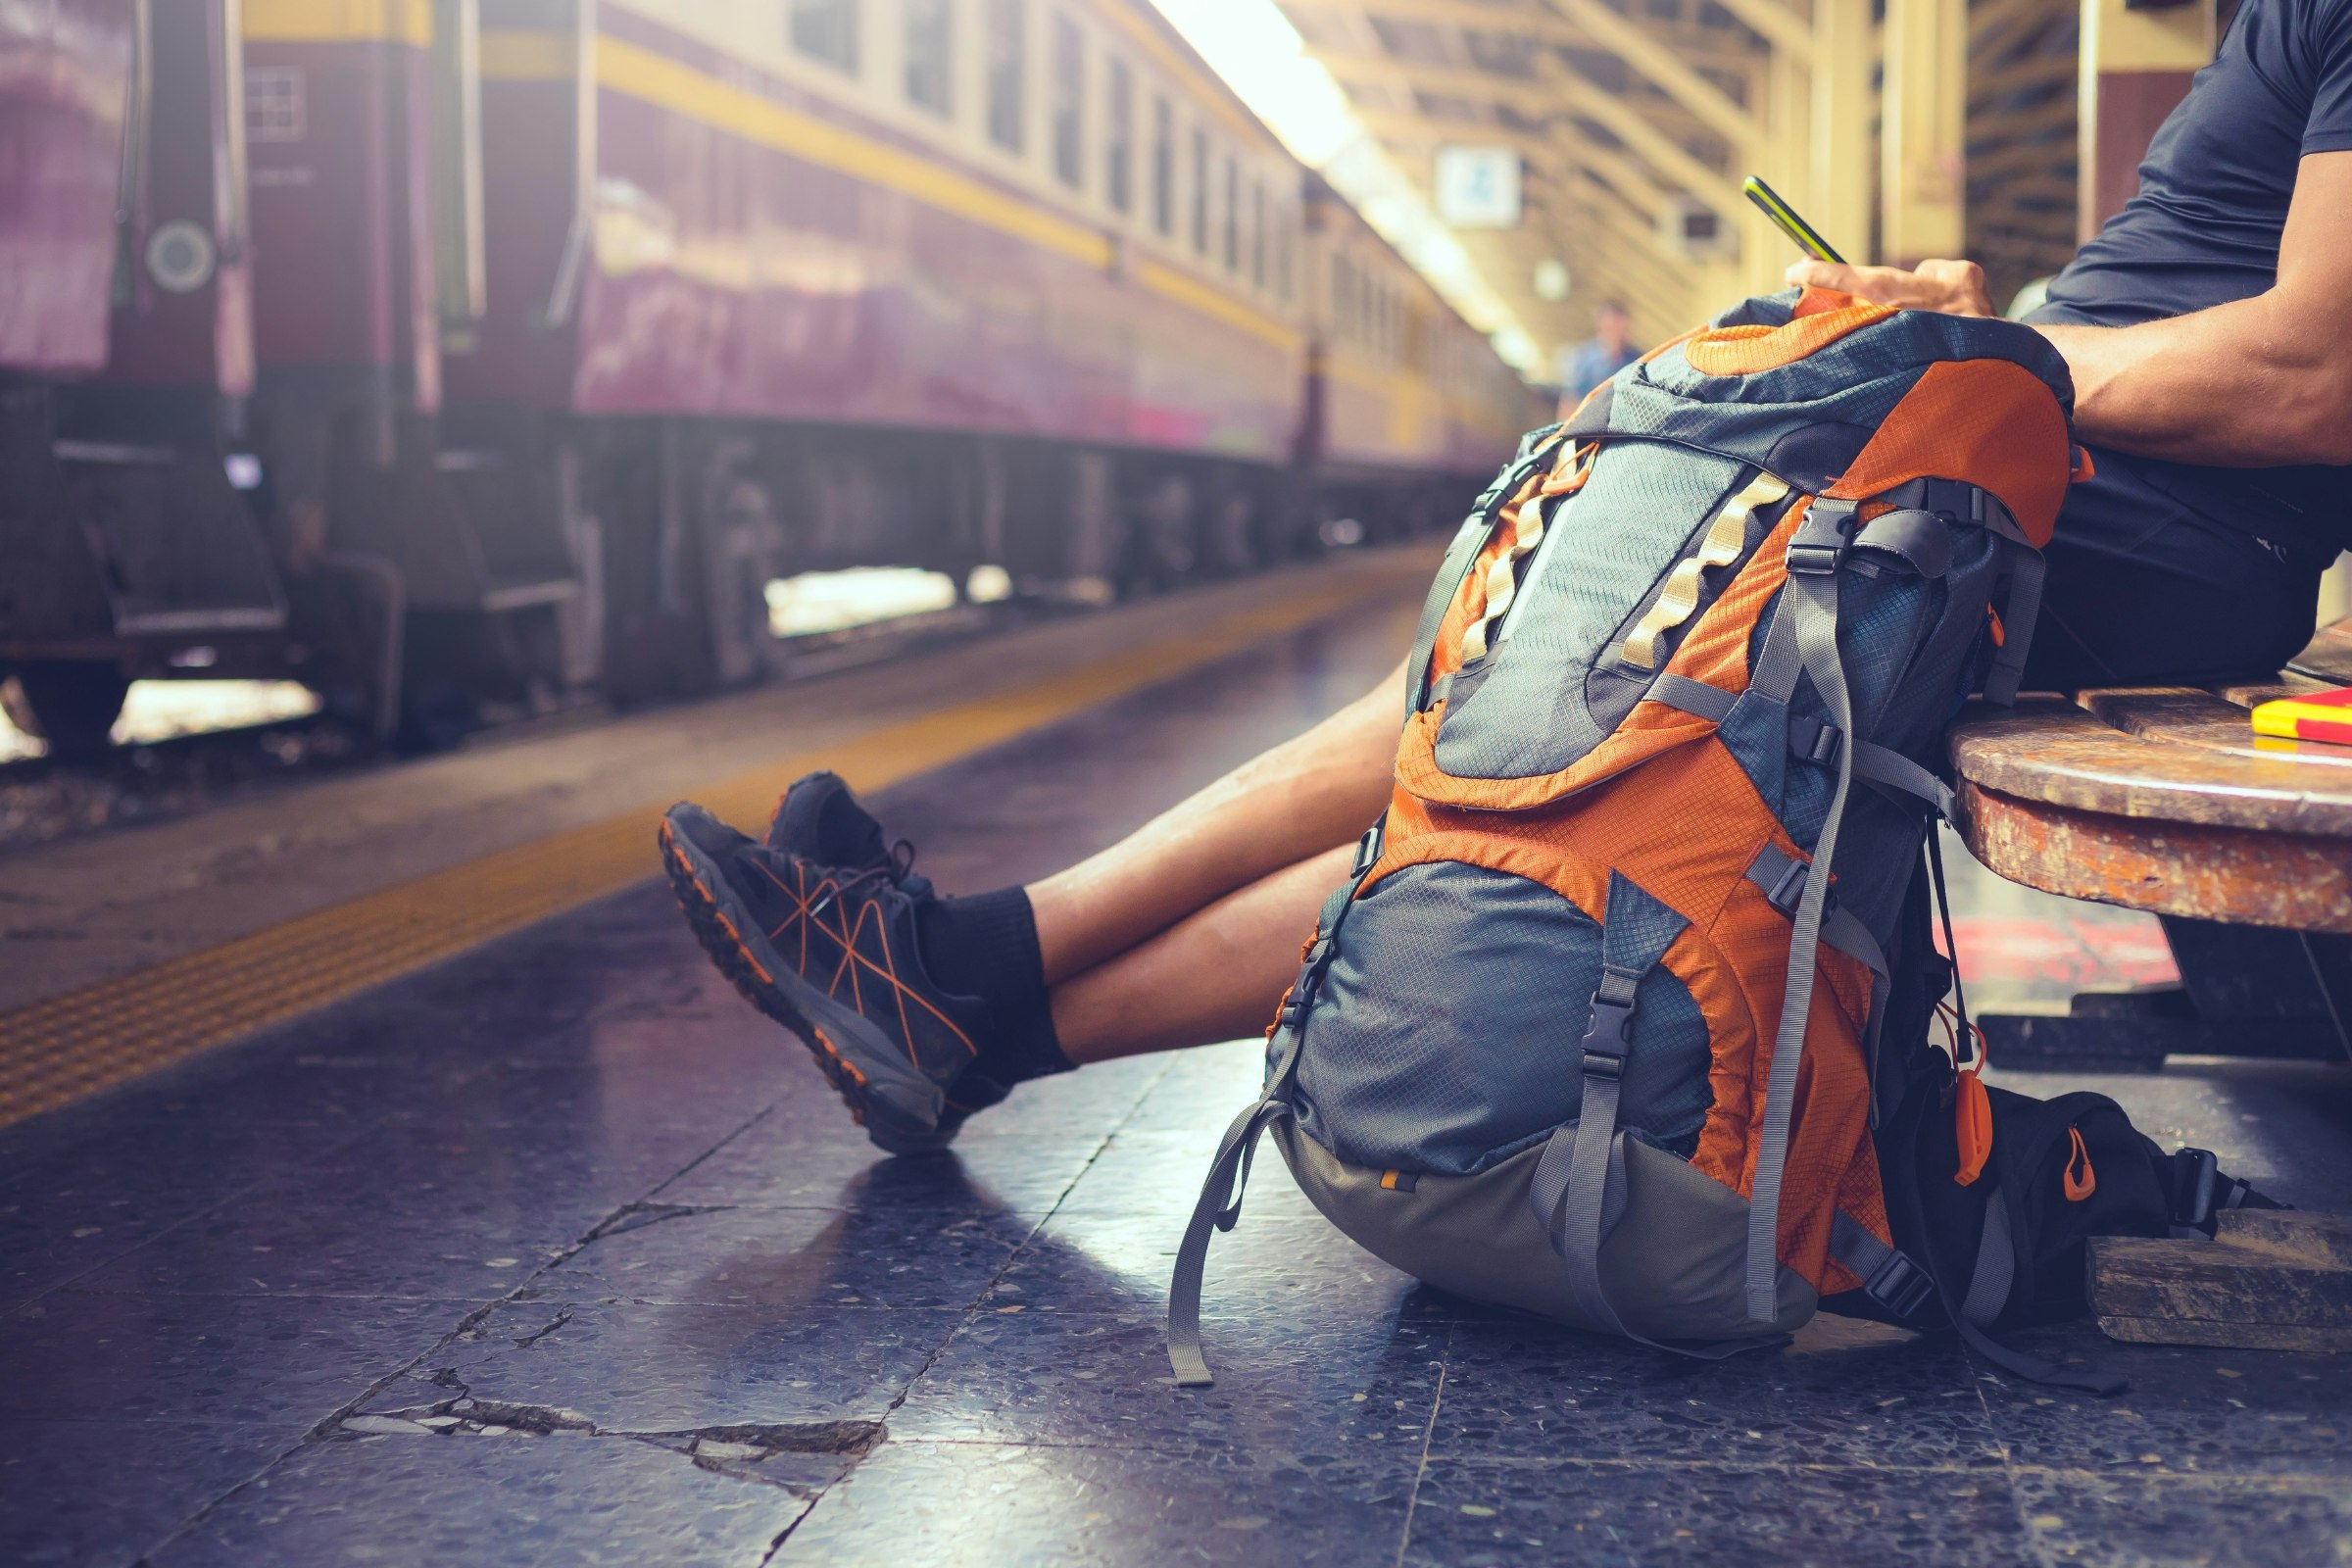 A backpacker uses his phone at a railway station while waiting for a train.